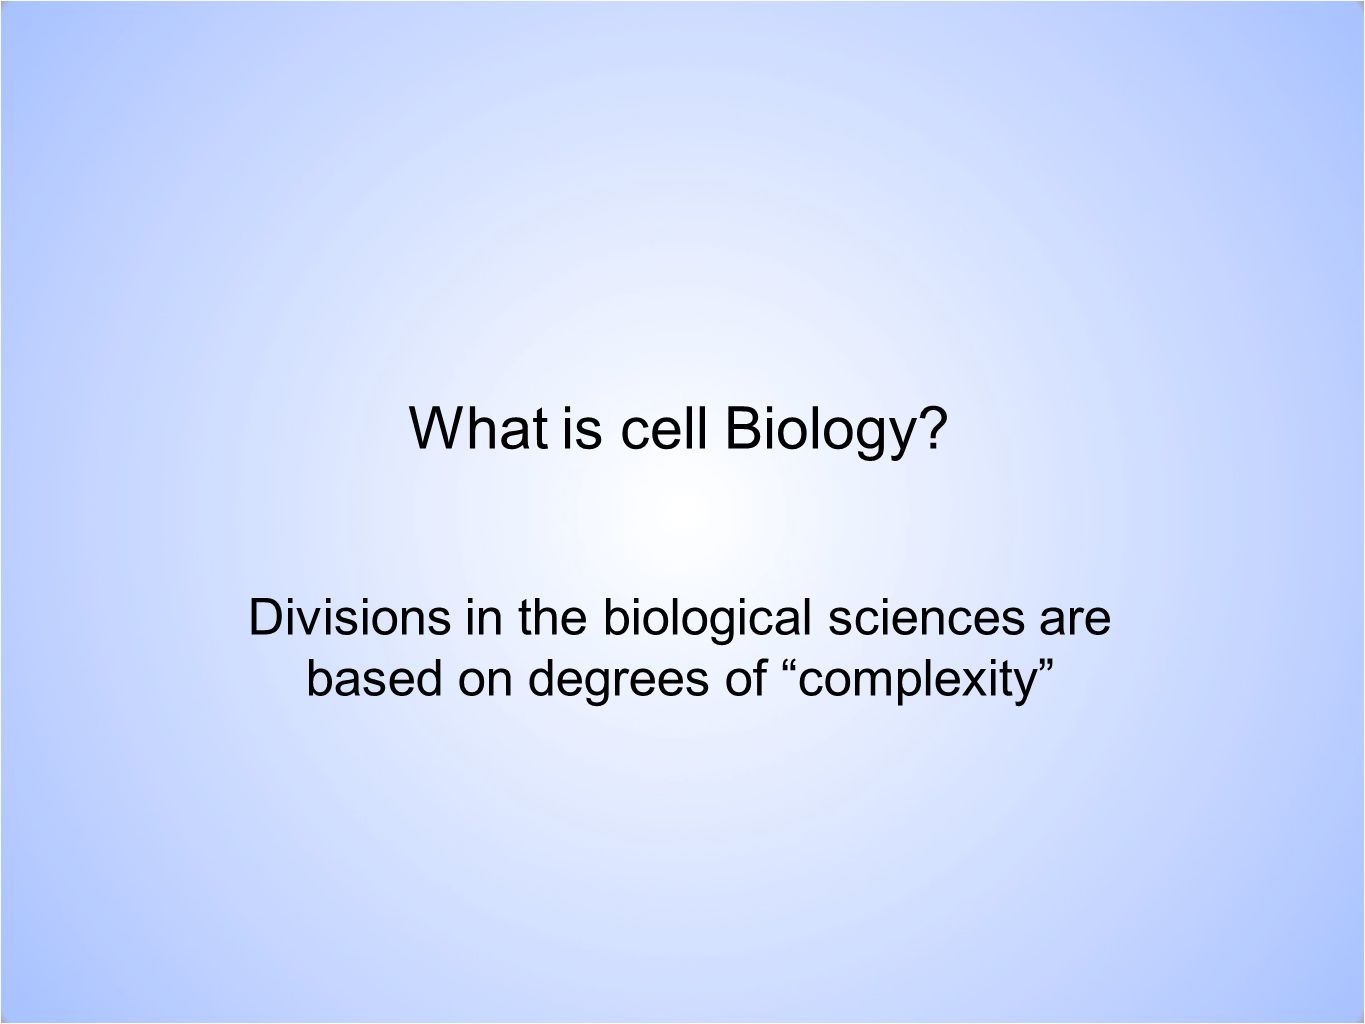 Divisions in the biological sciences are based on degrees of complexity